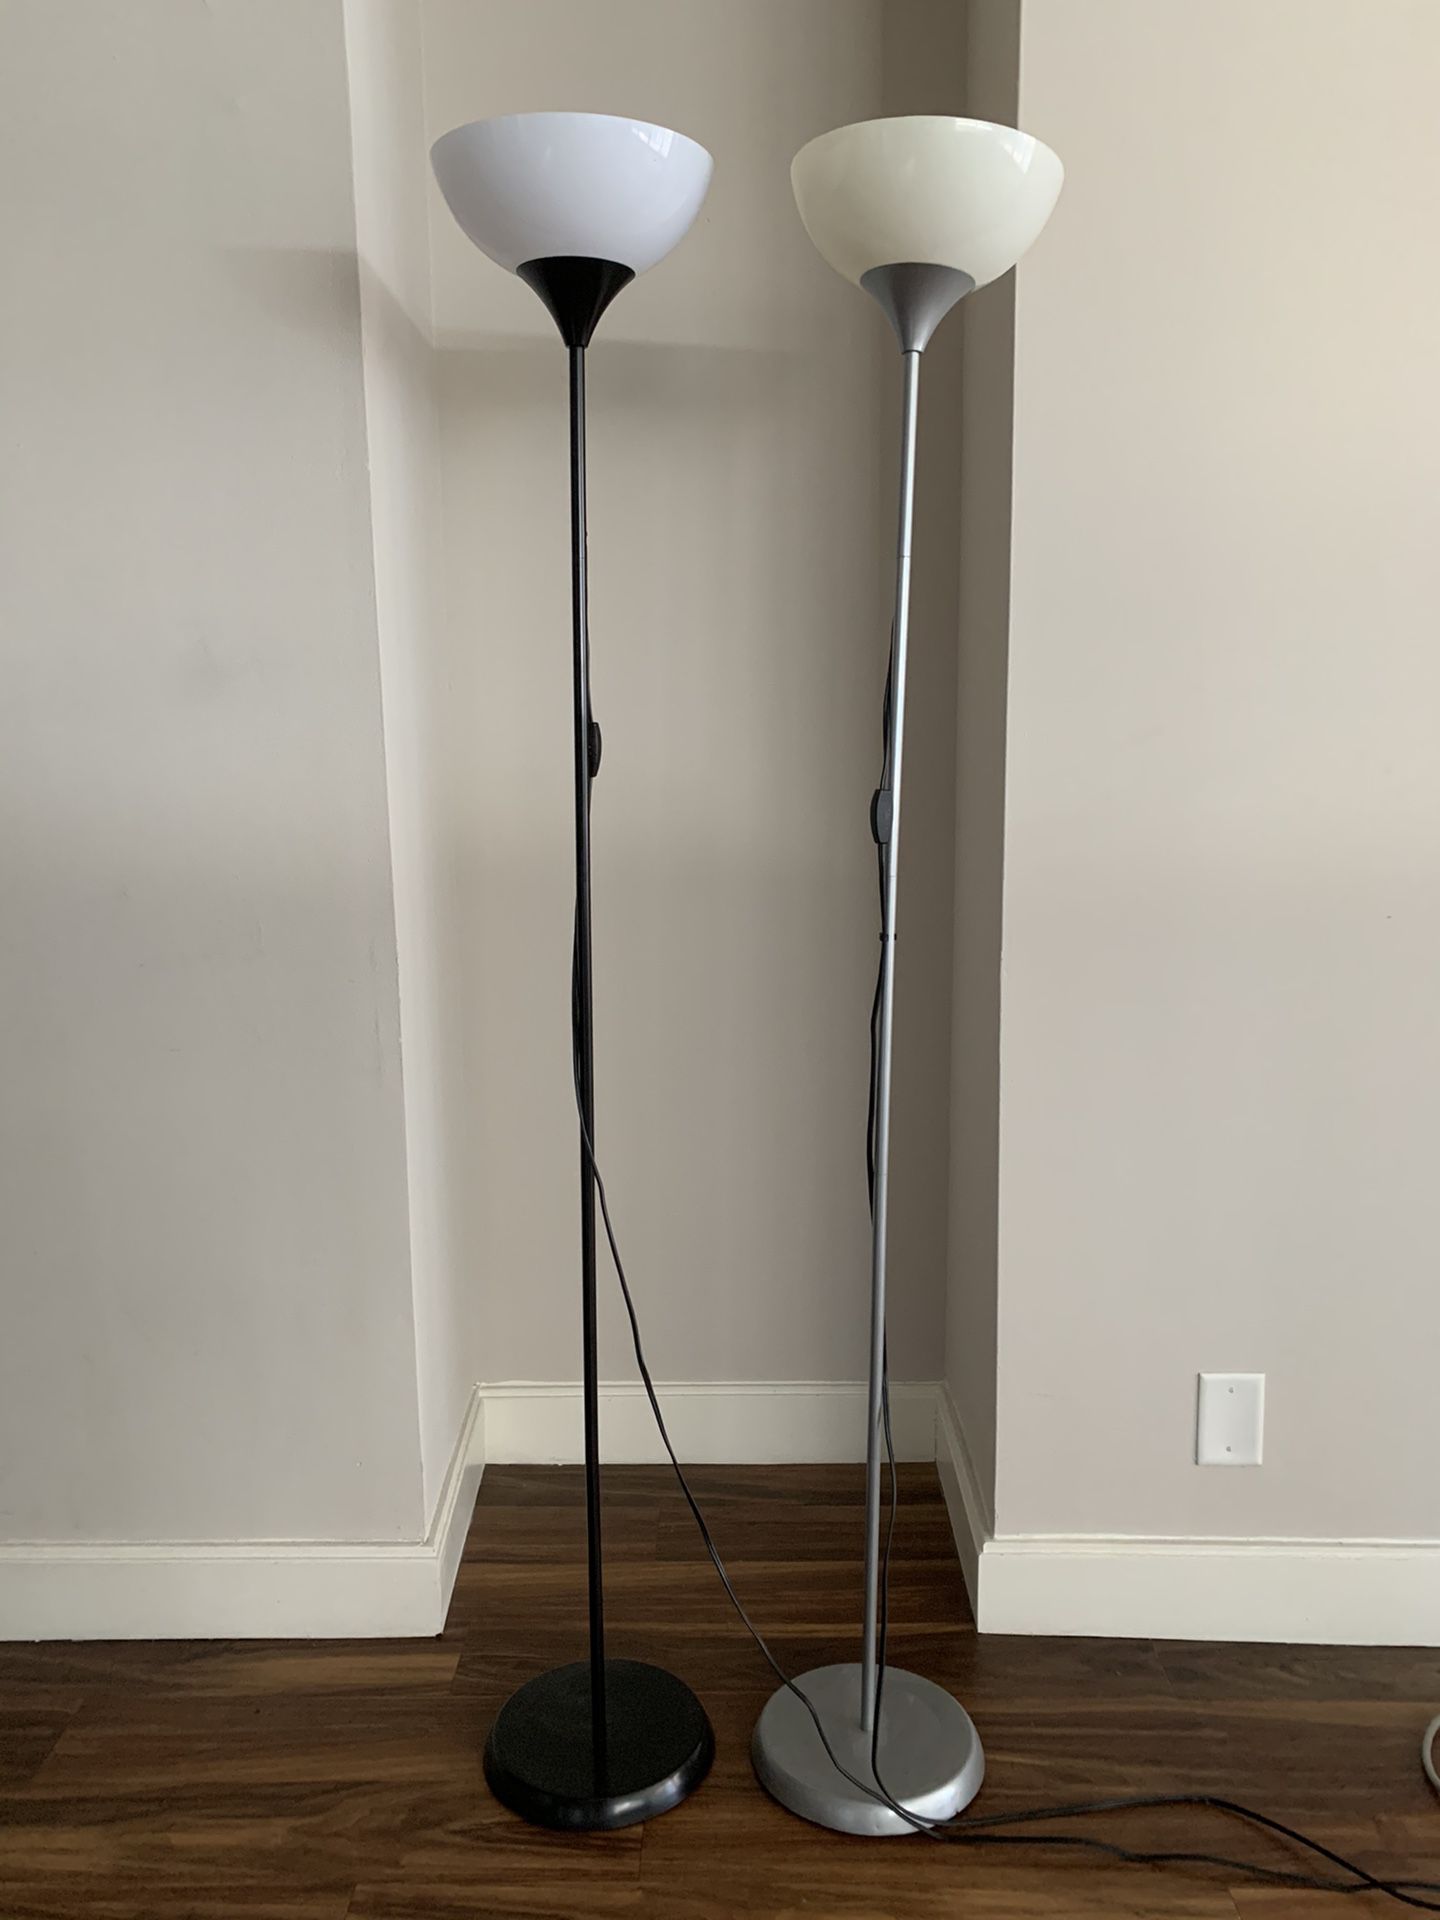 Set of floor lamps with light bulbs included